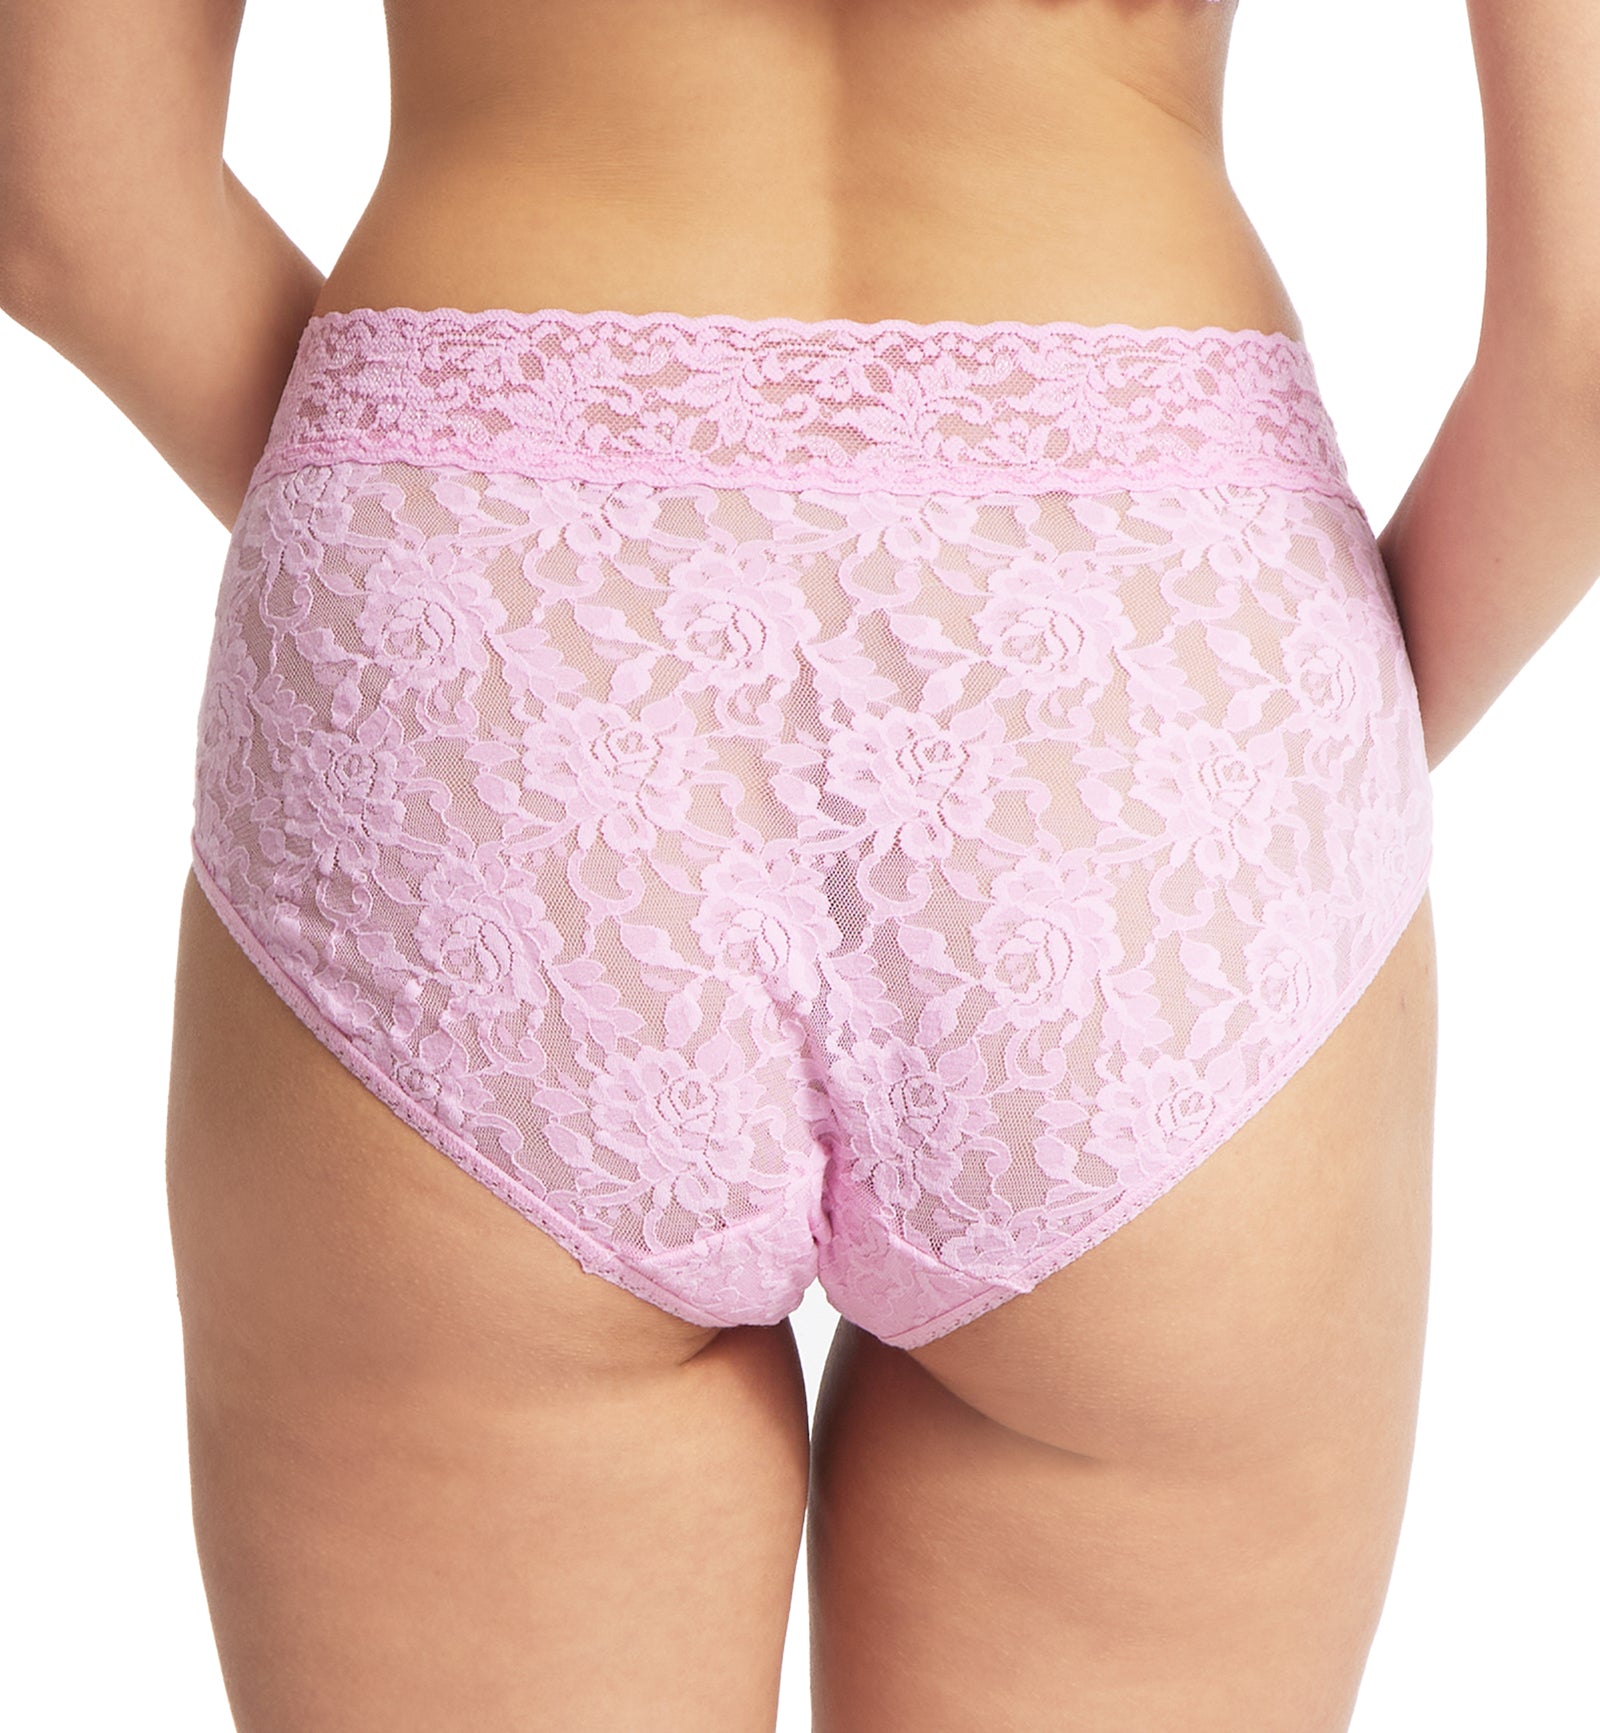 Hanky Panky Signature Lace French Brief (461),Small,Cotton Candy - Cotton Candy,Small